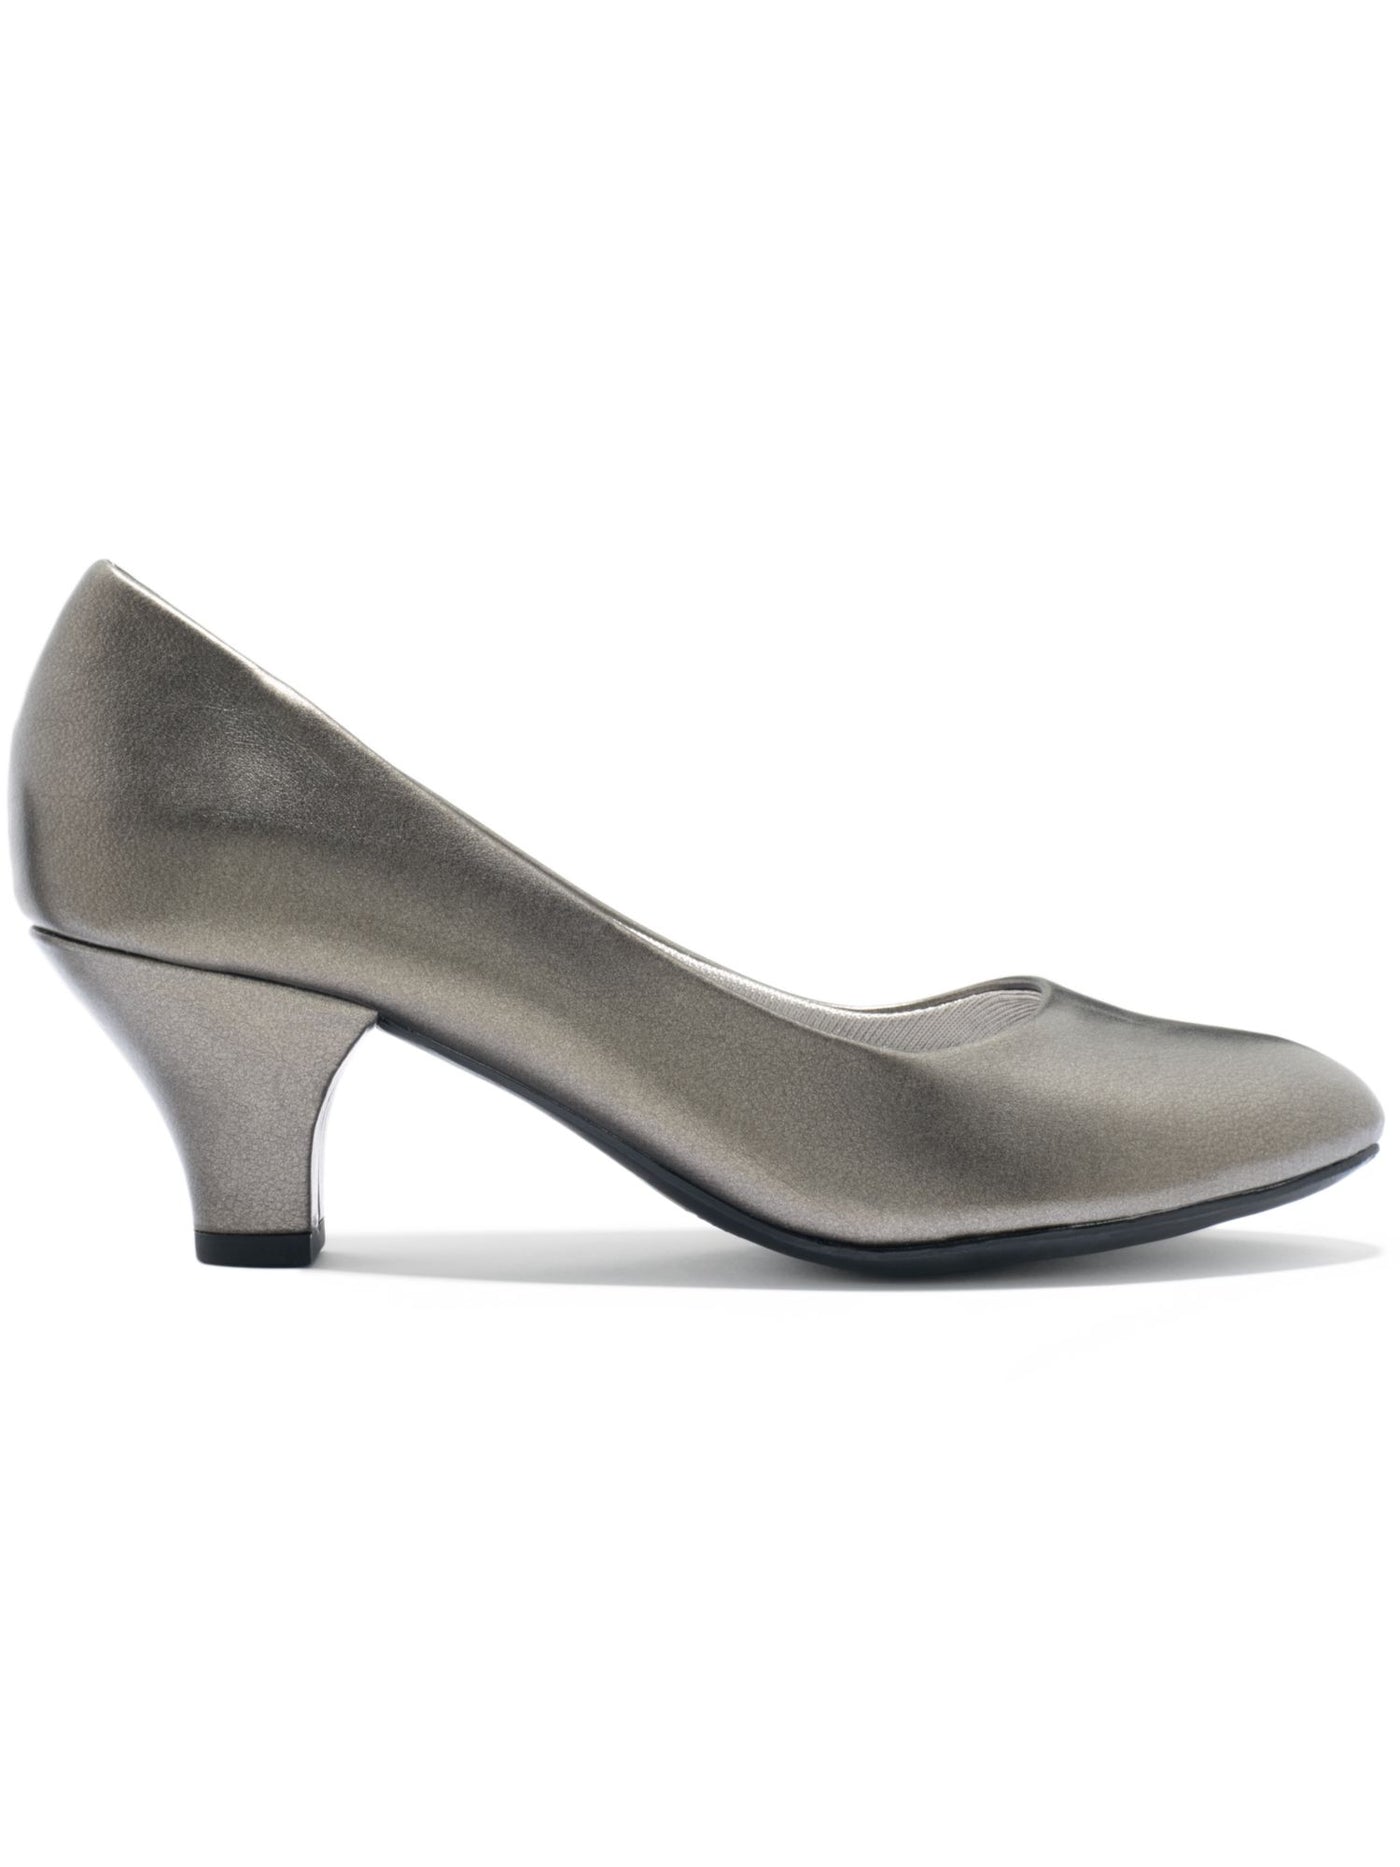 EASY STREET Womens Gray Cushioned Fabulous Almond Toe Cone Heel Slip On Pumps Shoes 7.5 M